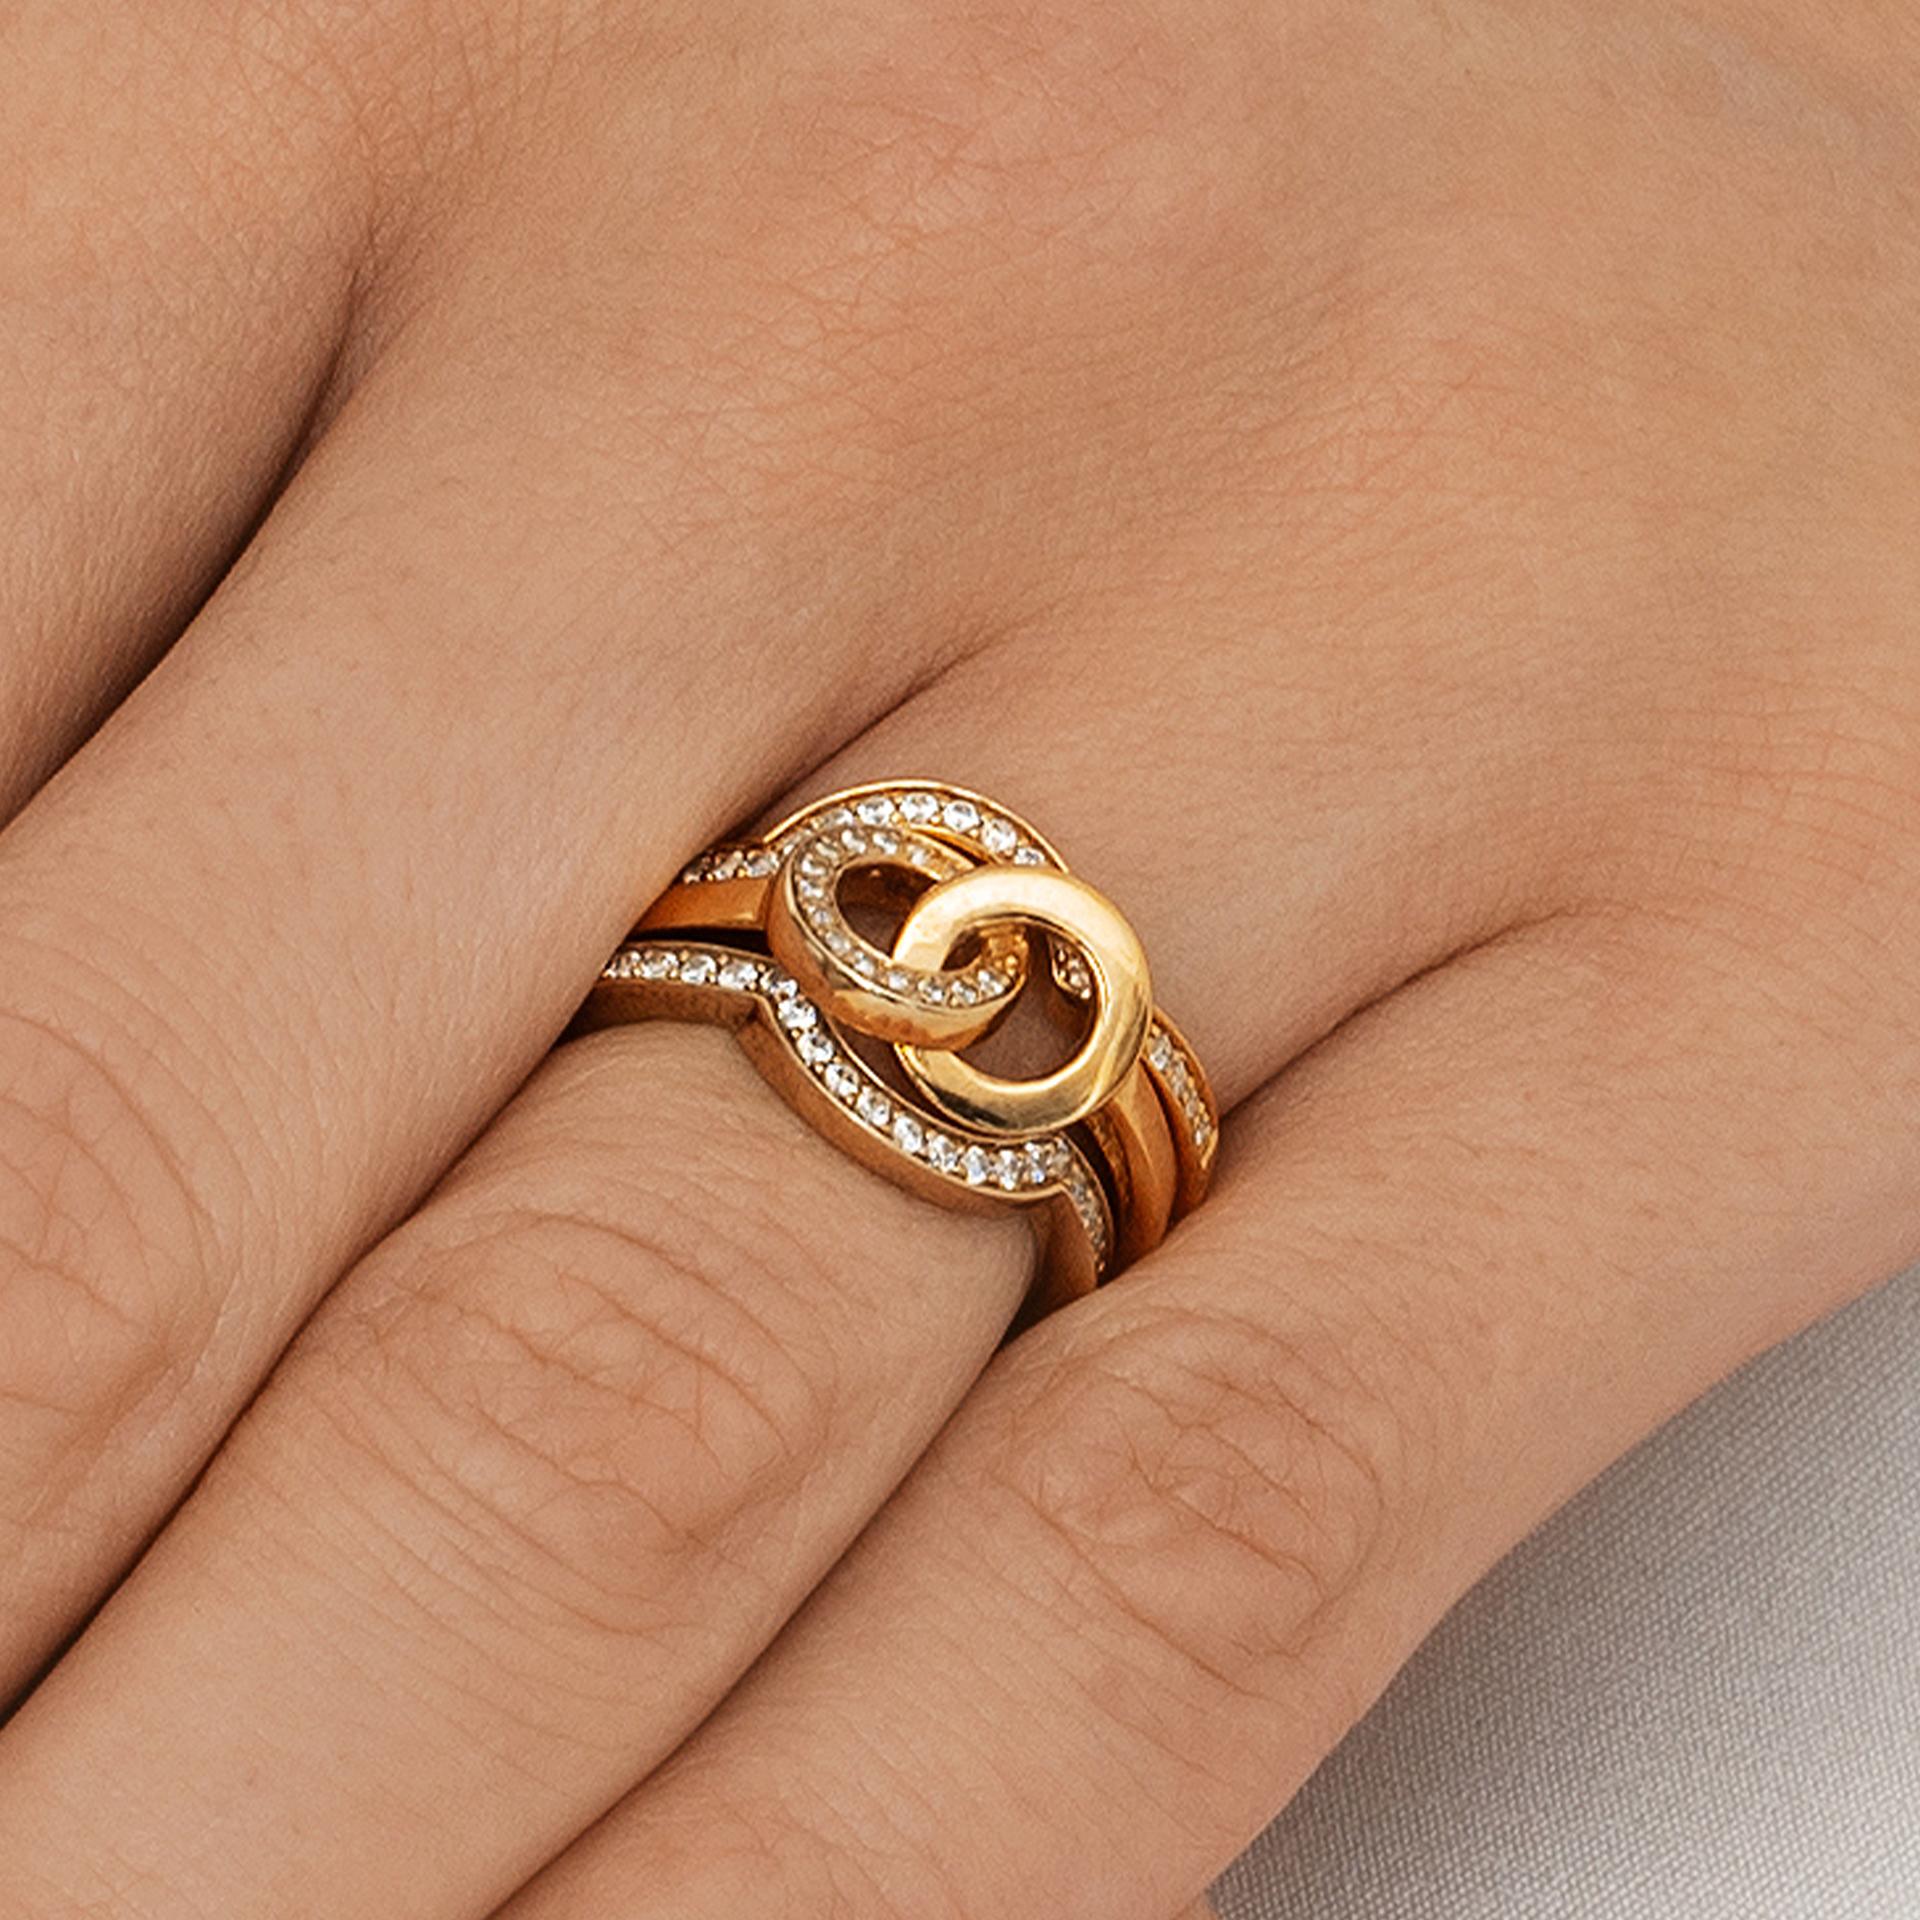 You & Me Ring